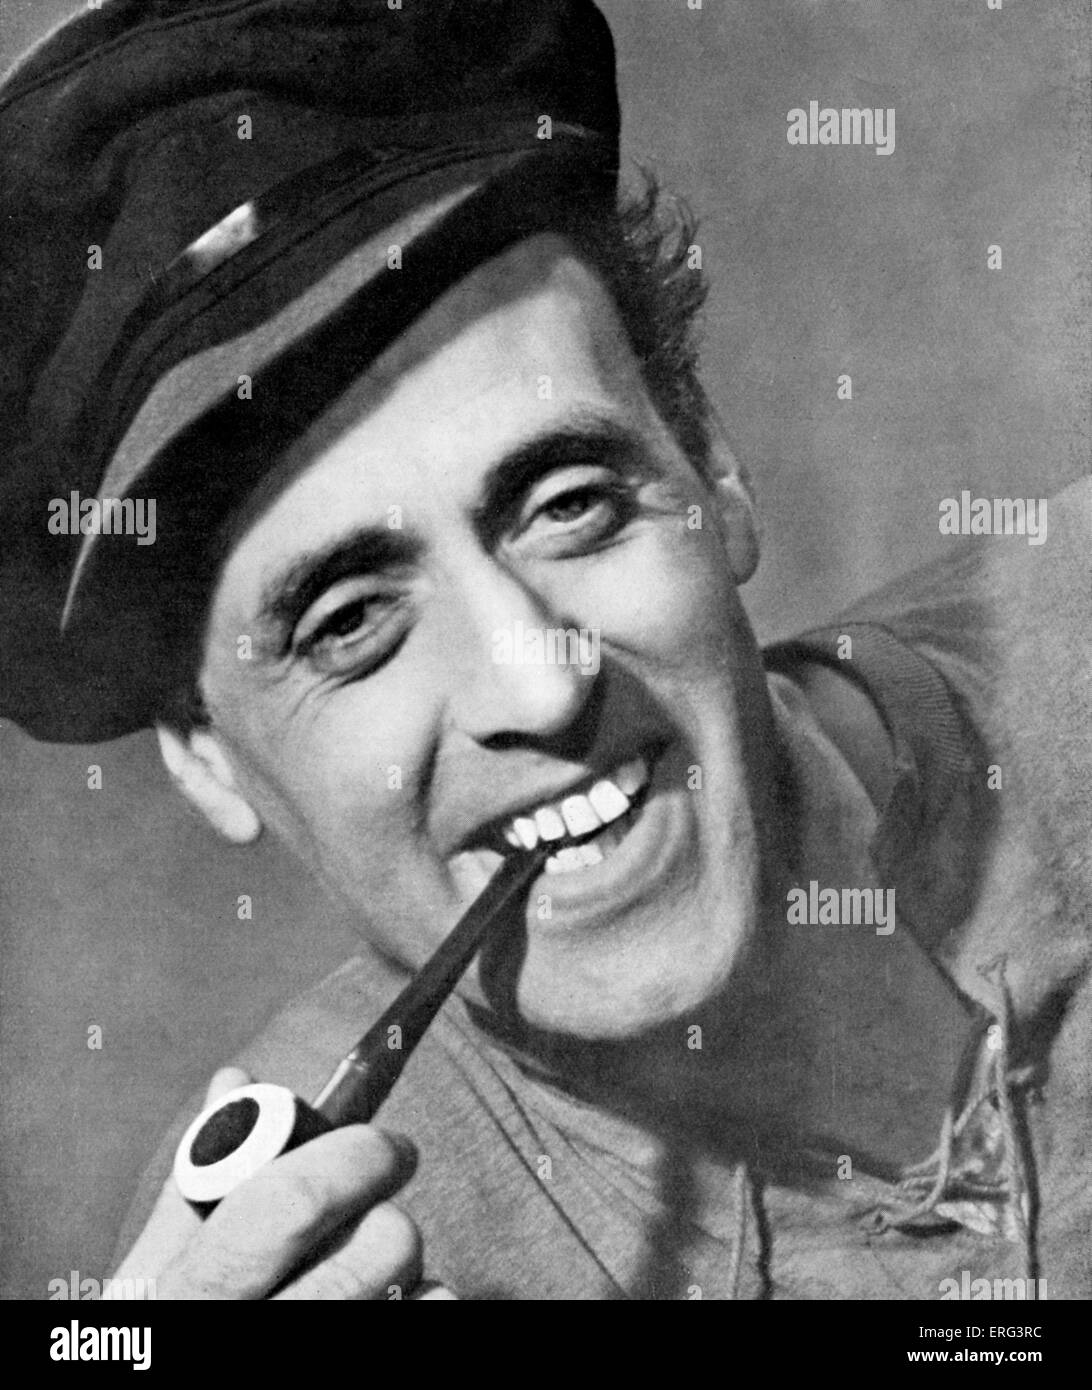 'The Gusher' by Ian Hay, with Alastair Sim as Peter Bogle, at the Princes Theatre, London, October 1937. AS, Scottish actor, 9 Stock Photo